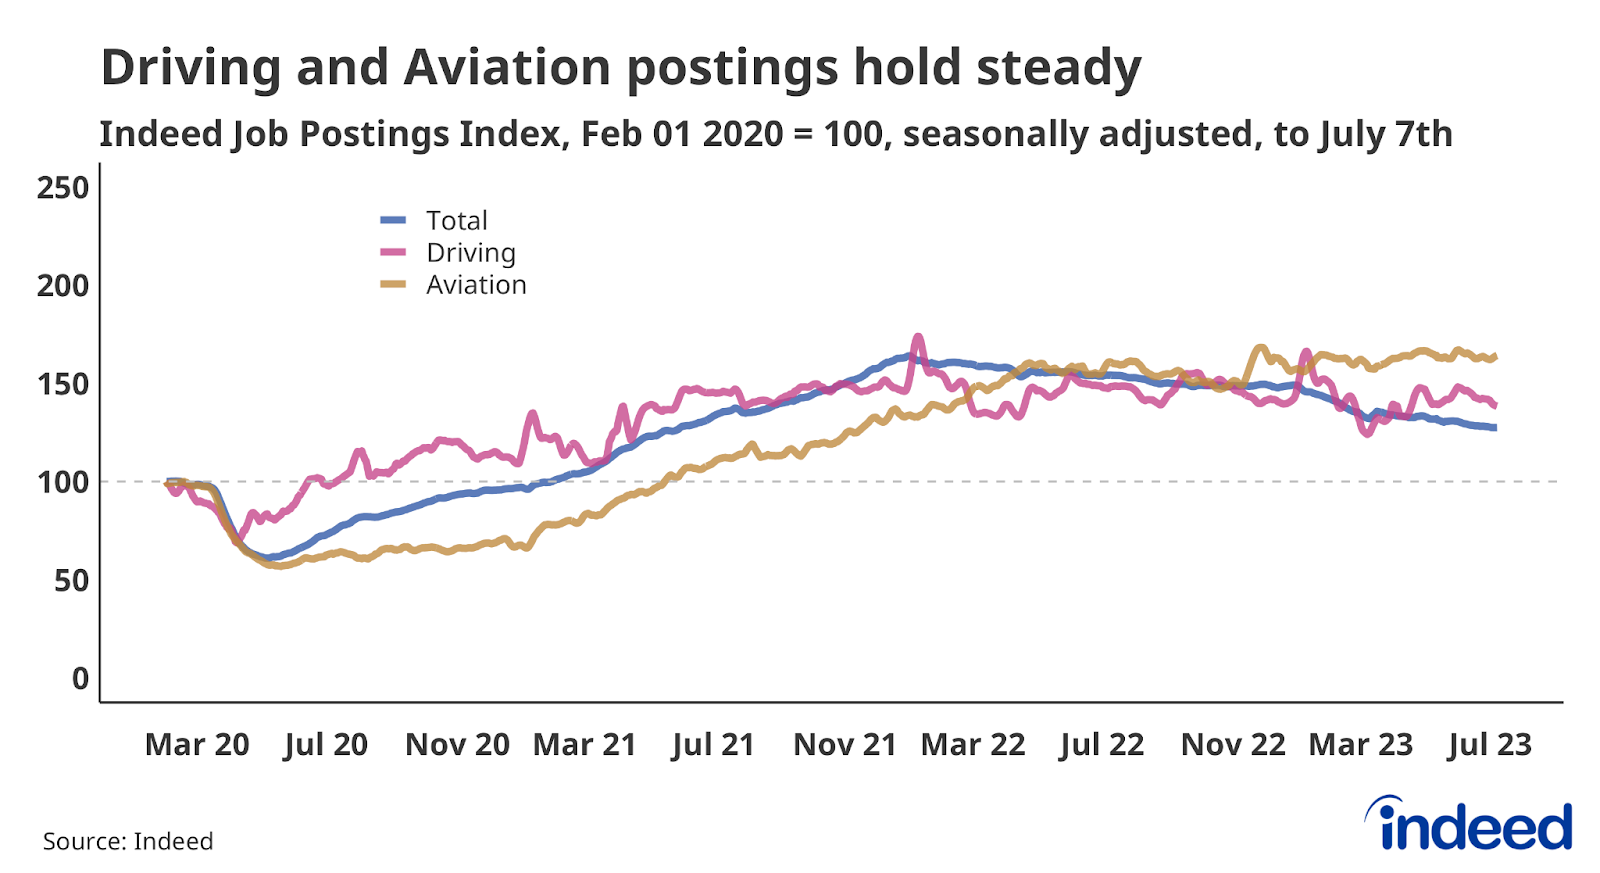 Line chart showing job postings in Driving and Aviation to July 7th, 2023. Aviation postings are up while Driving postings are down slightly. 